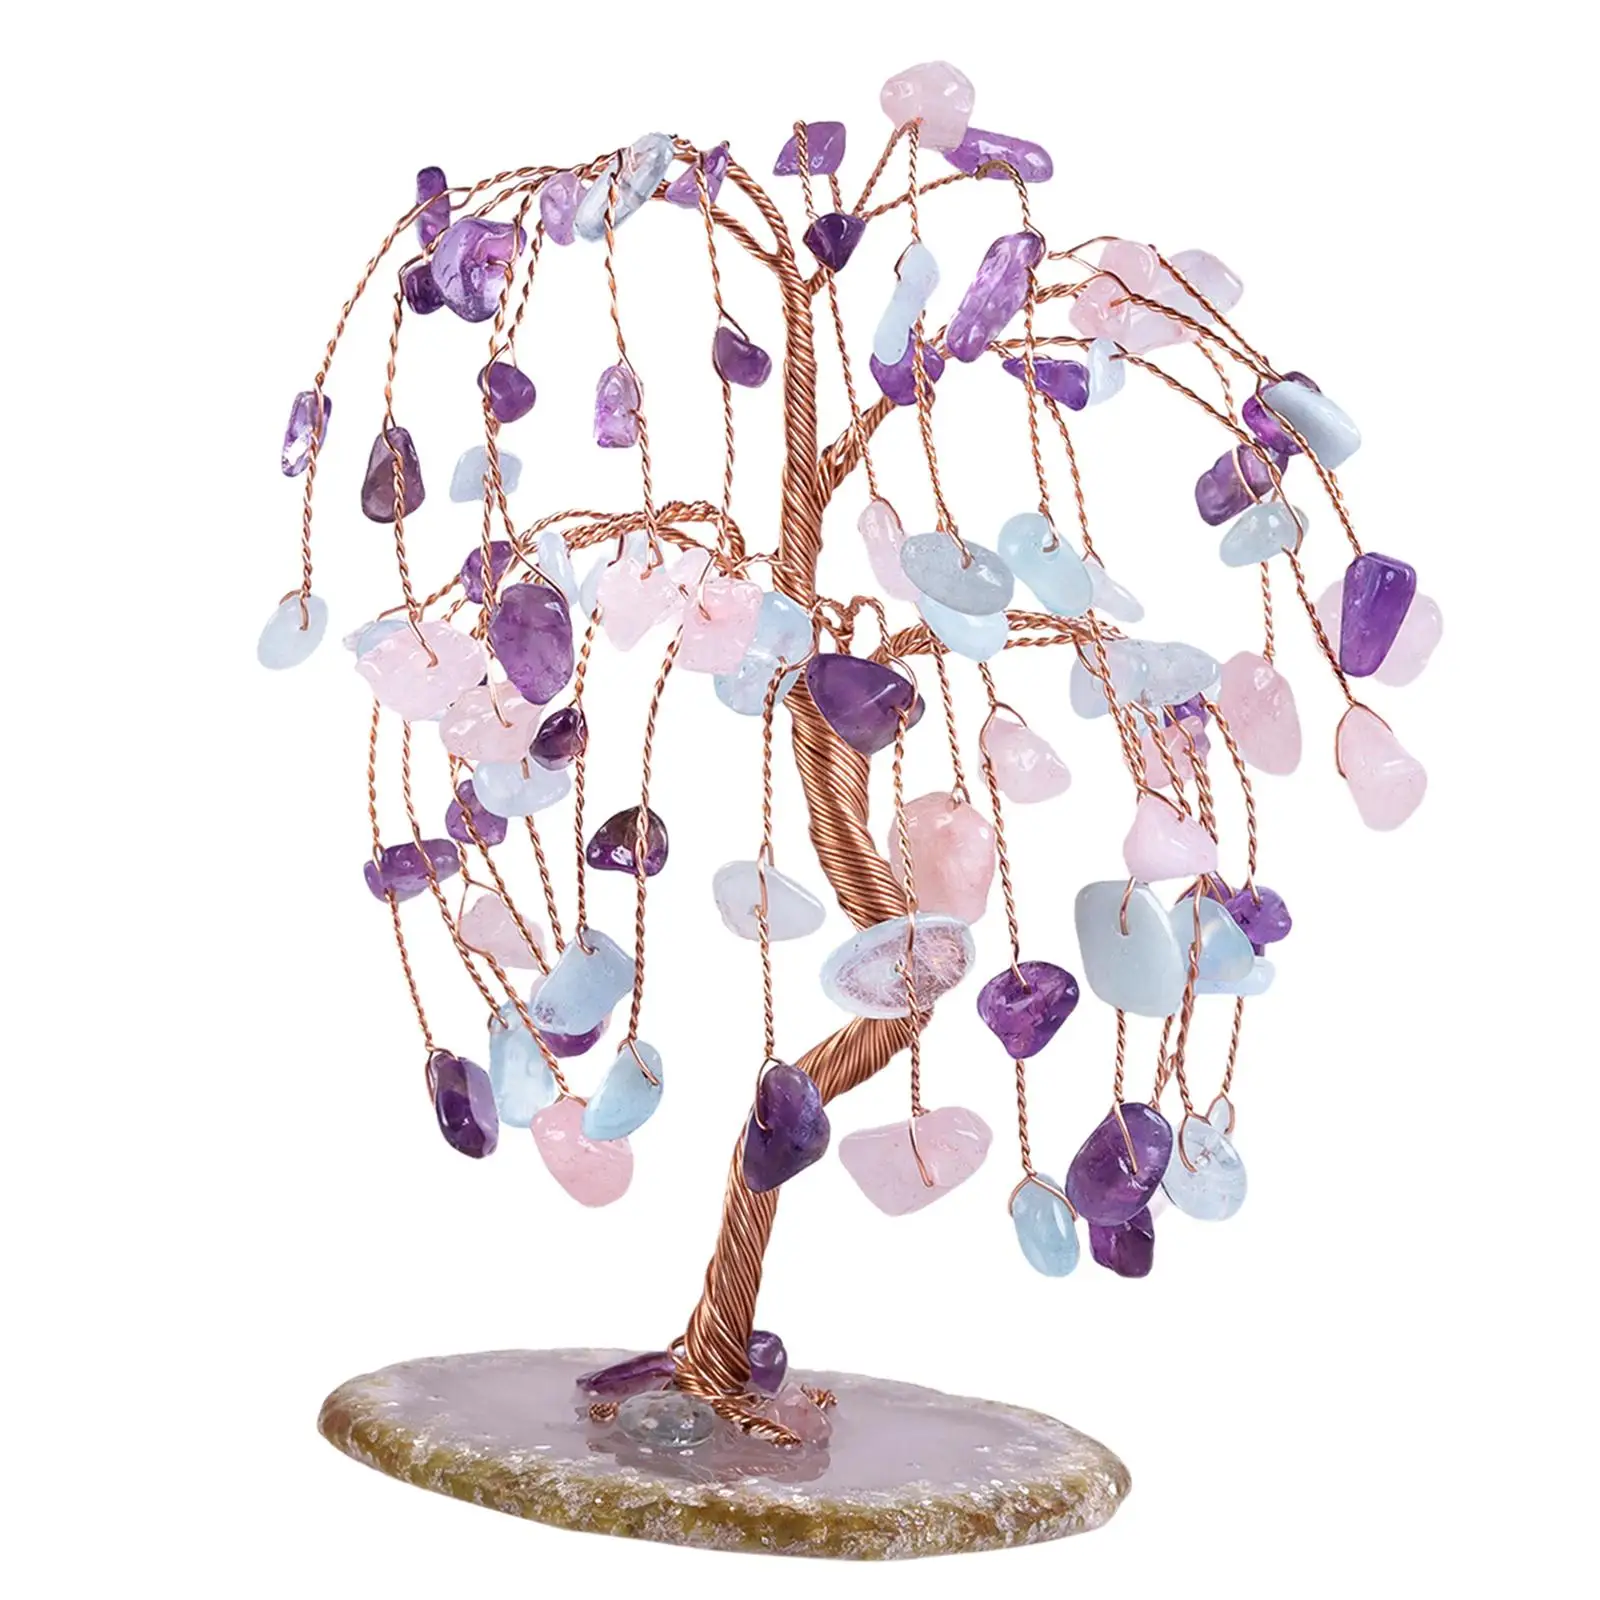 Crystals Money Tree Good Luck Wealth Ornament Gemstone for Home Decoration